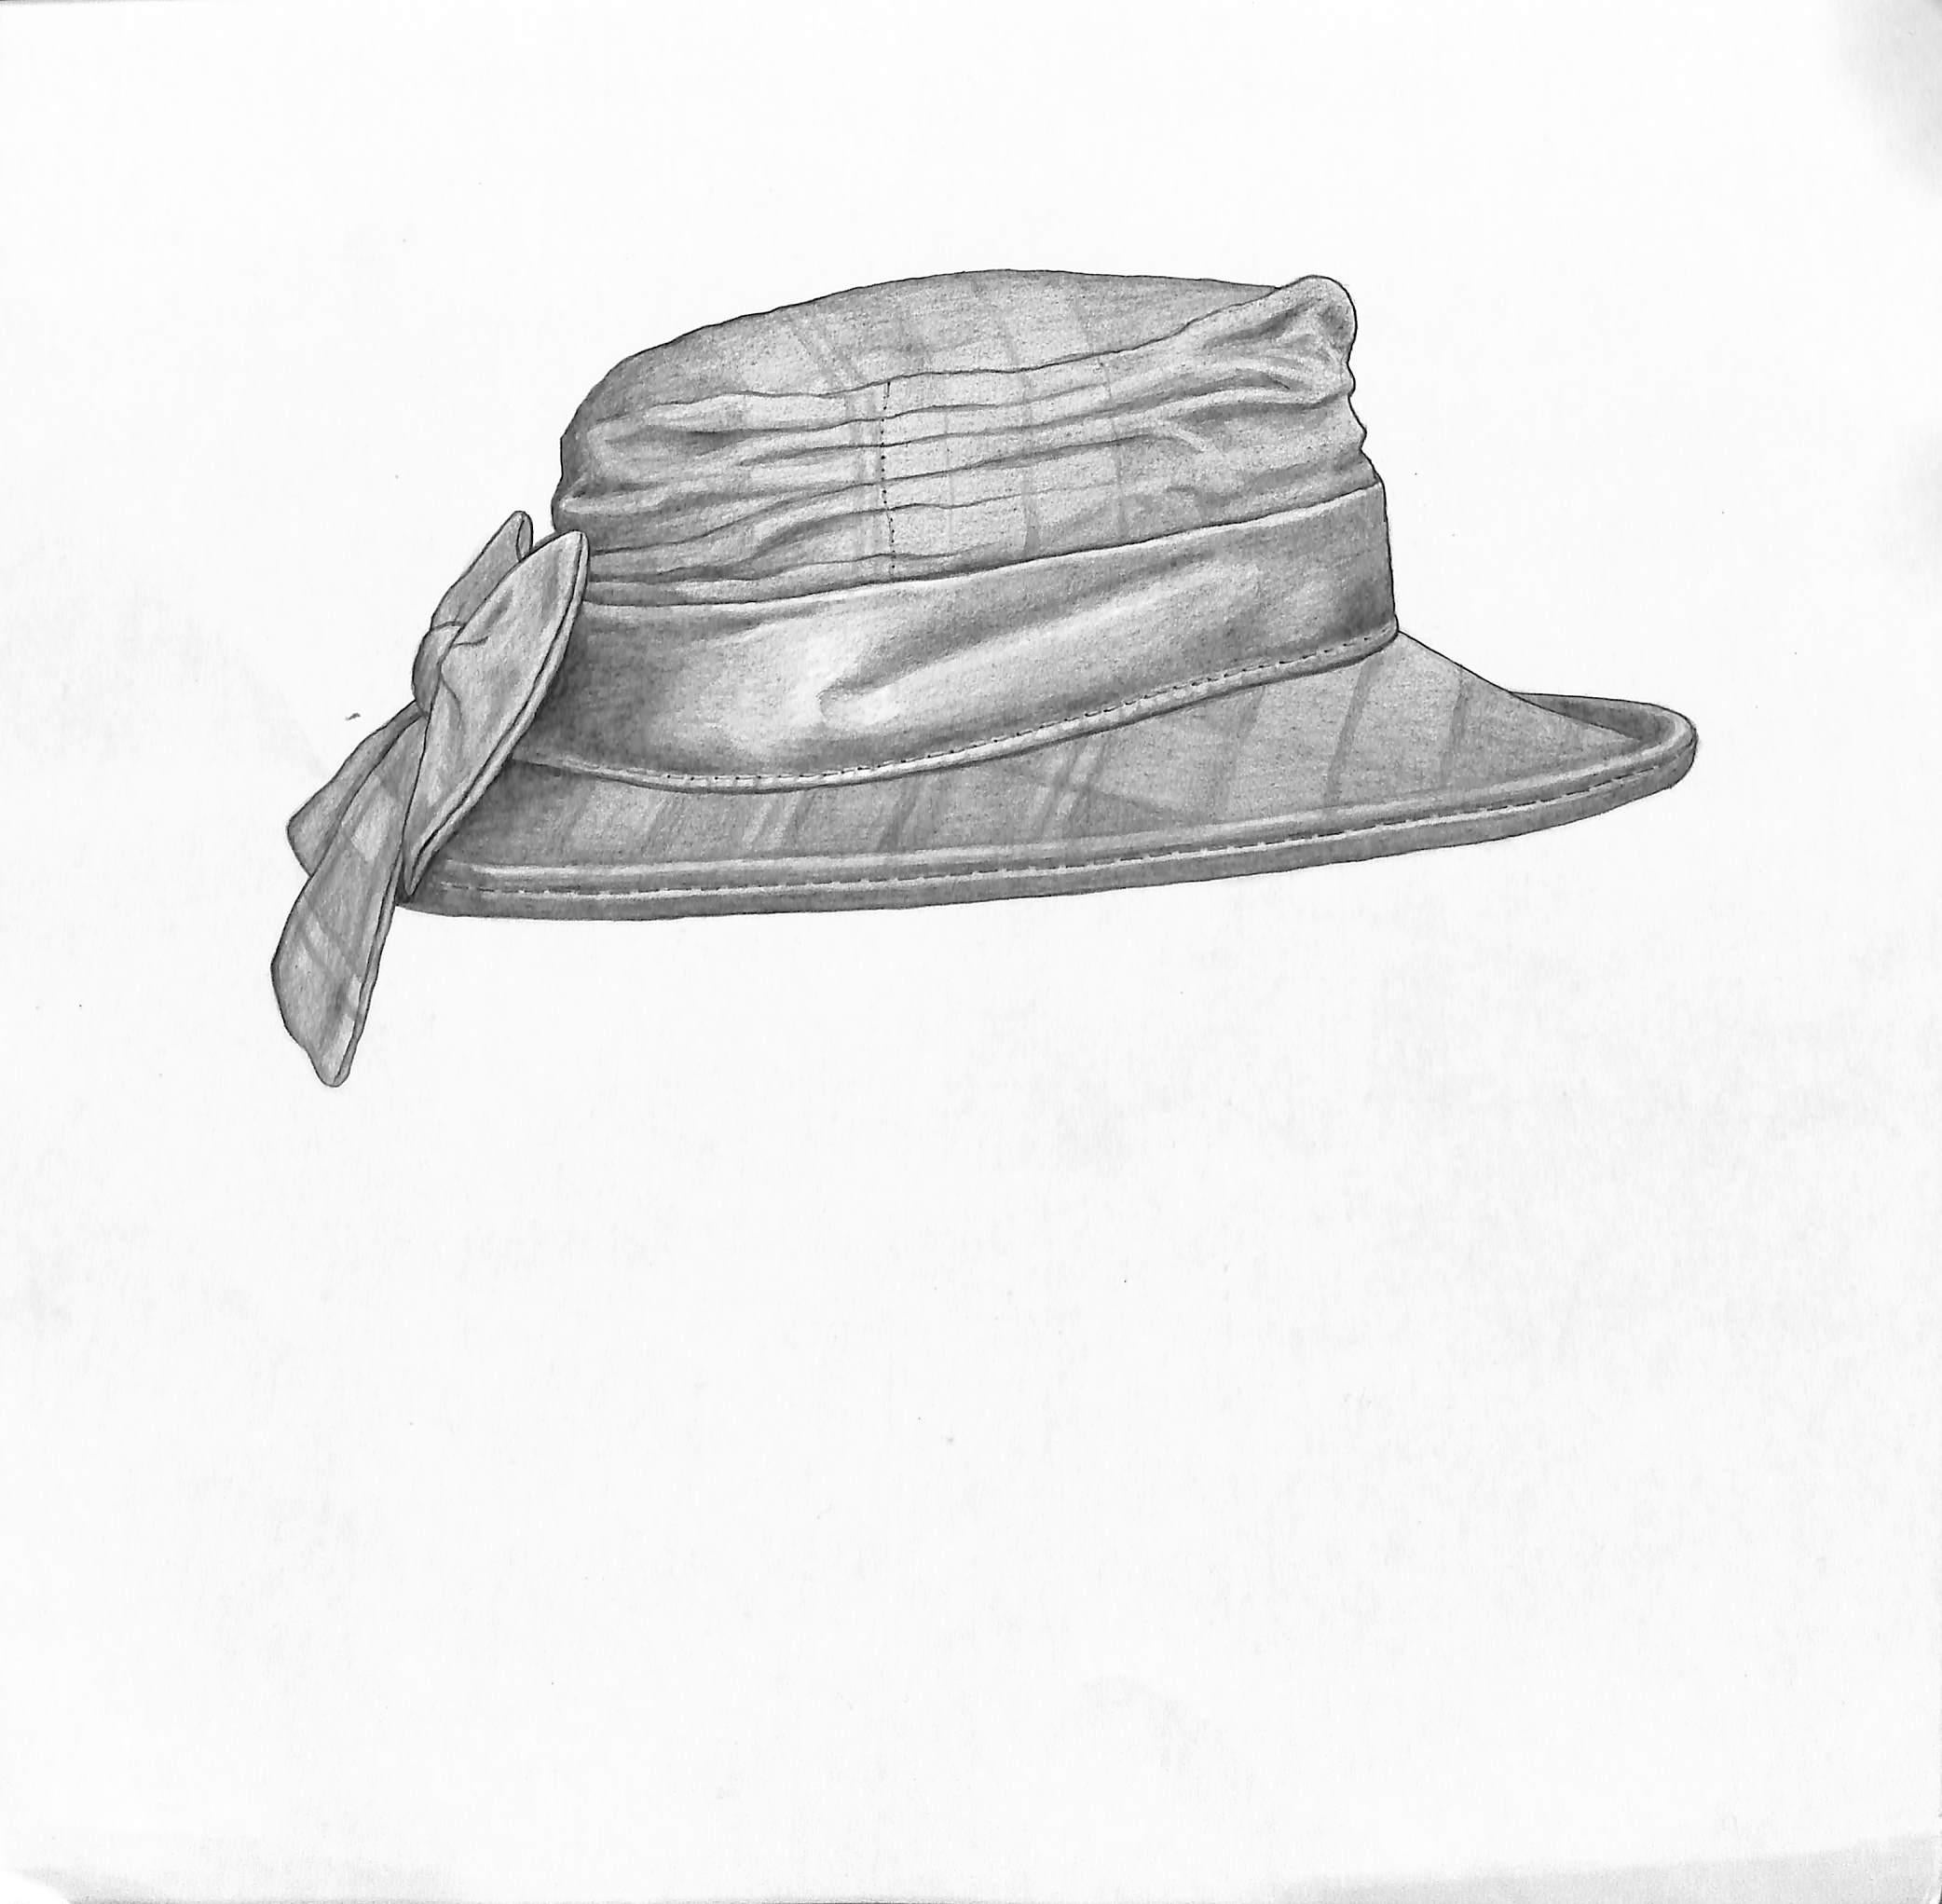 Ladies All-Weather Hat Graphite Drawing - Art by Unknown